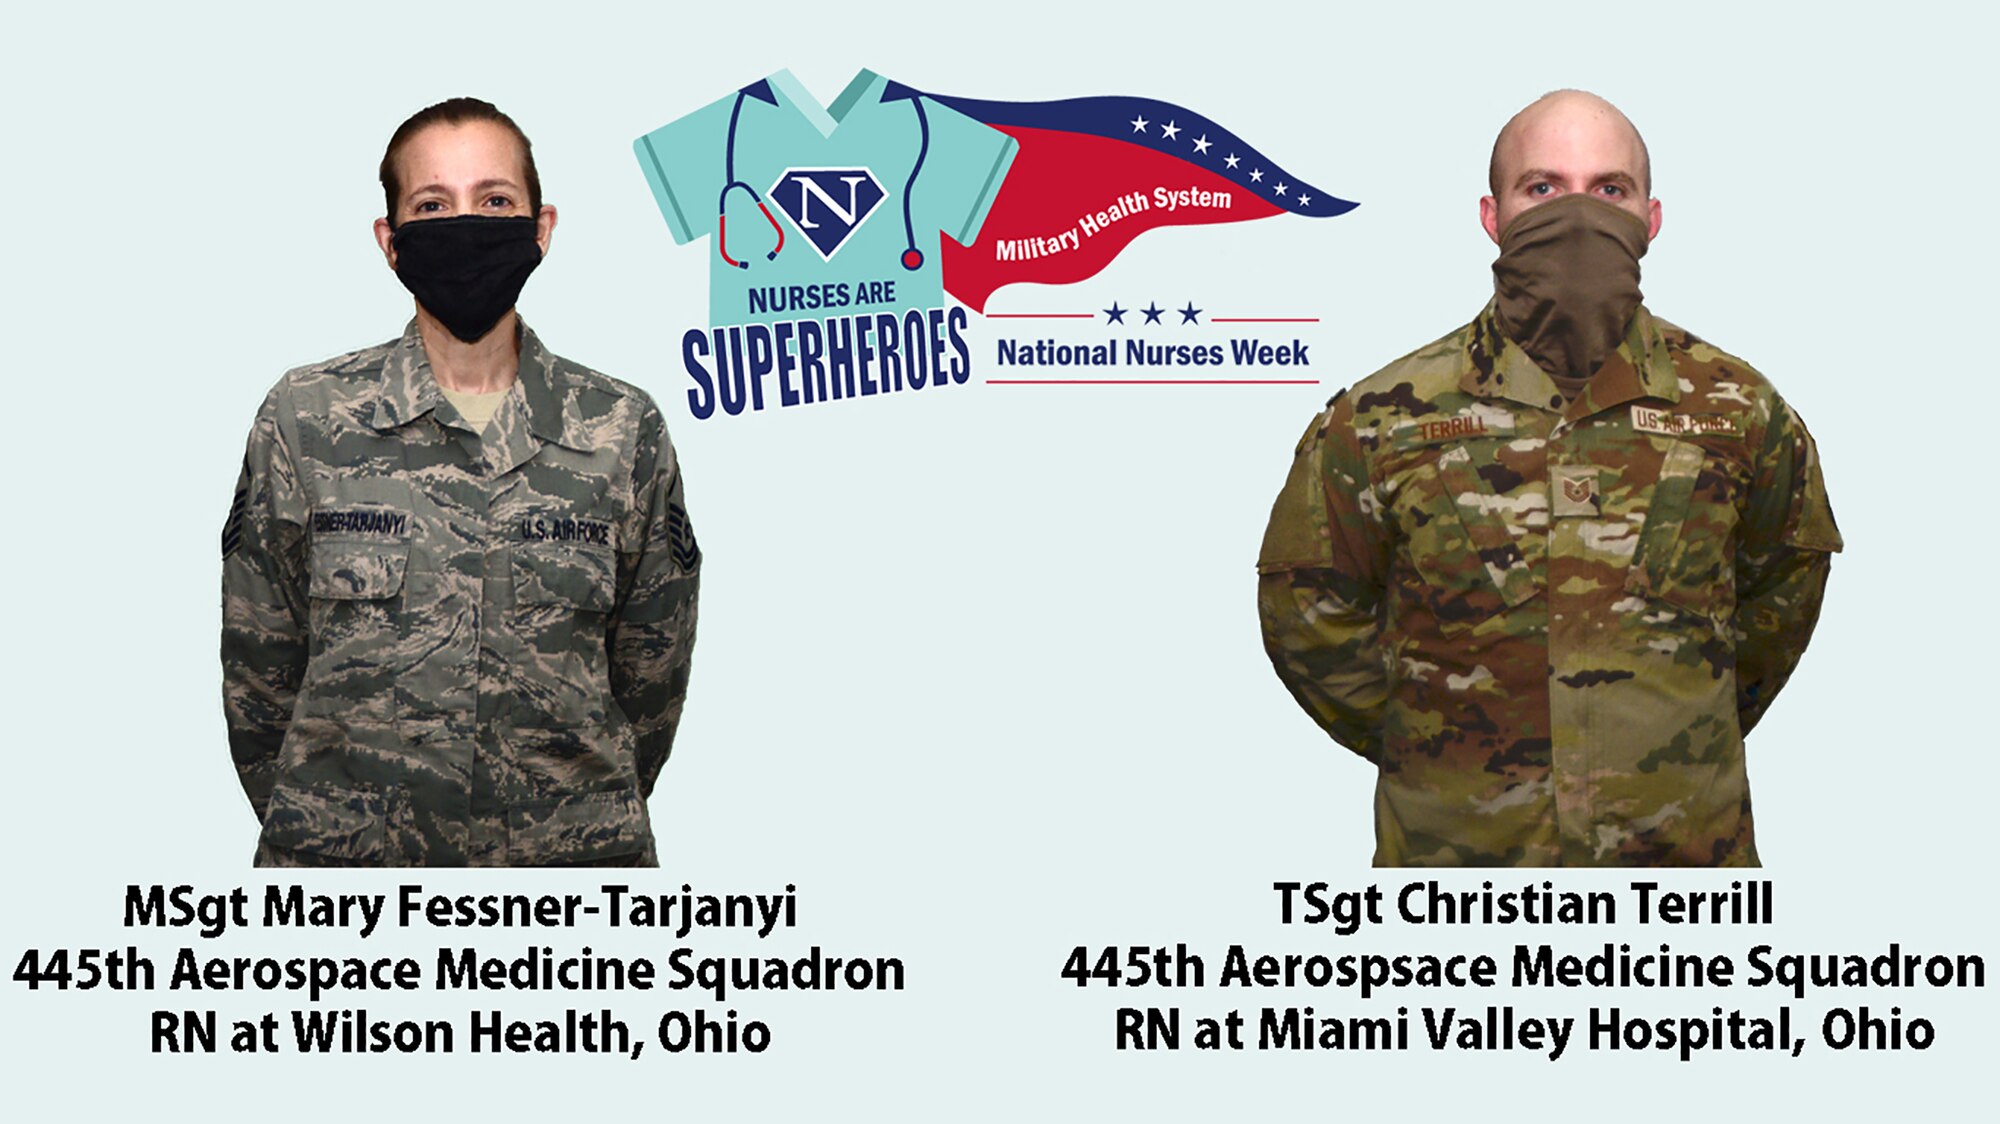 Master Sgt. Mary Fessner-Tarjanyi, 445th Aerospace Medicine Squadron unit training manager, is a registered nurse, lactation consultant at Wilson Health, Sidney, Ohio. Tech. Sgt. Christian Terrill, 445th Aerospace Medicine Squadron wing medical standards manager, is a registered nurse, medical surgery and post operation nurse at Miami Valley Hospital.